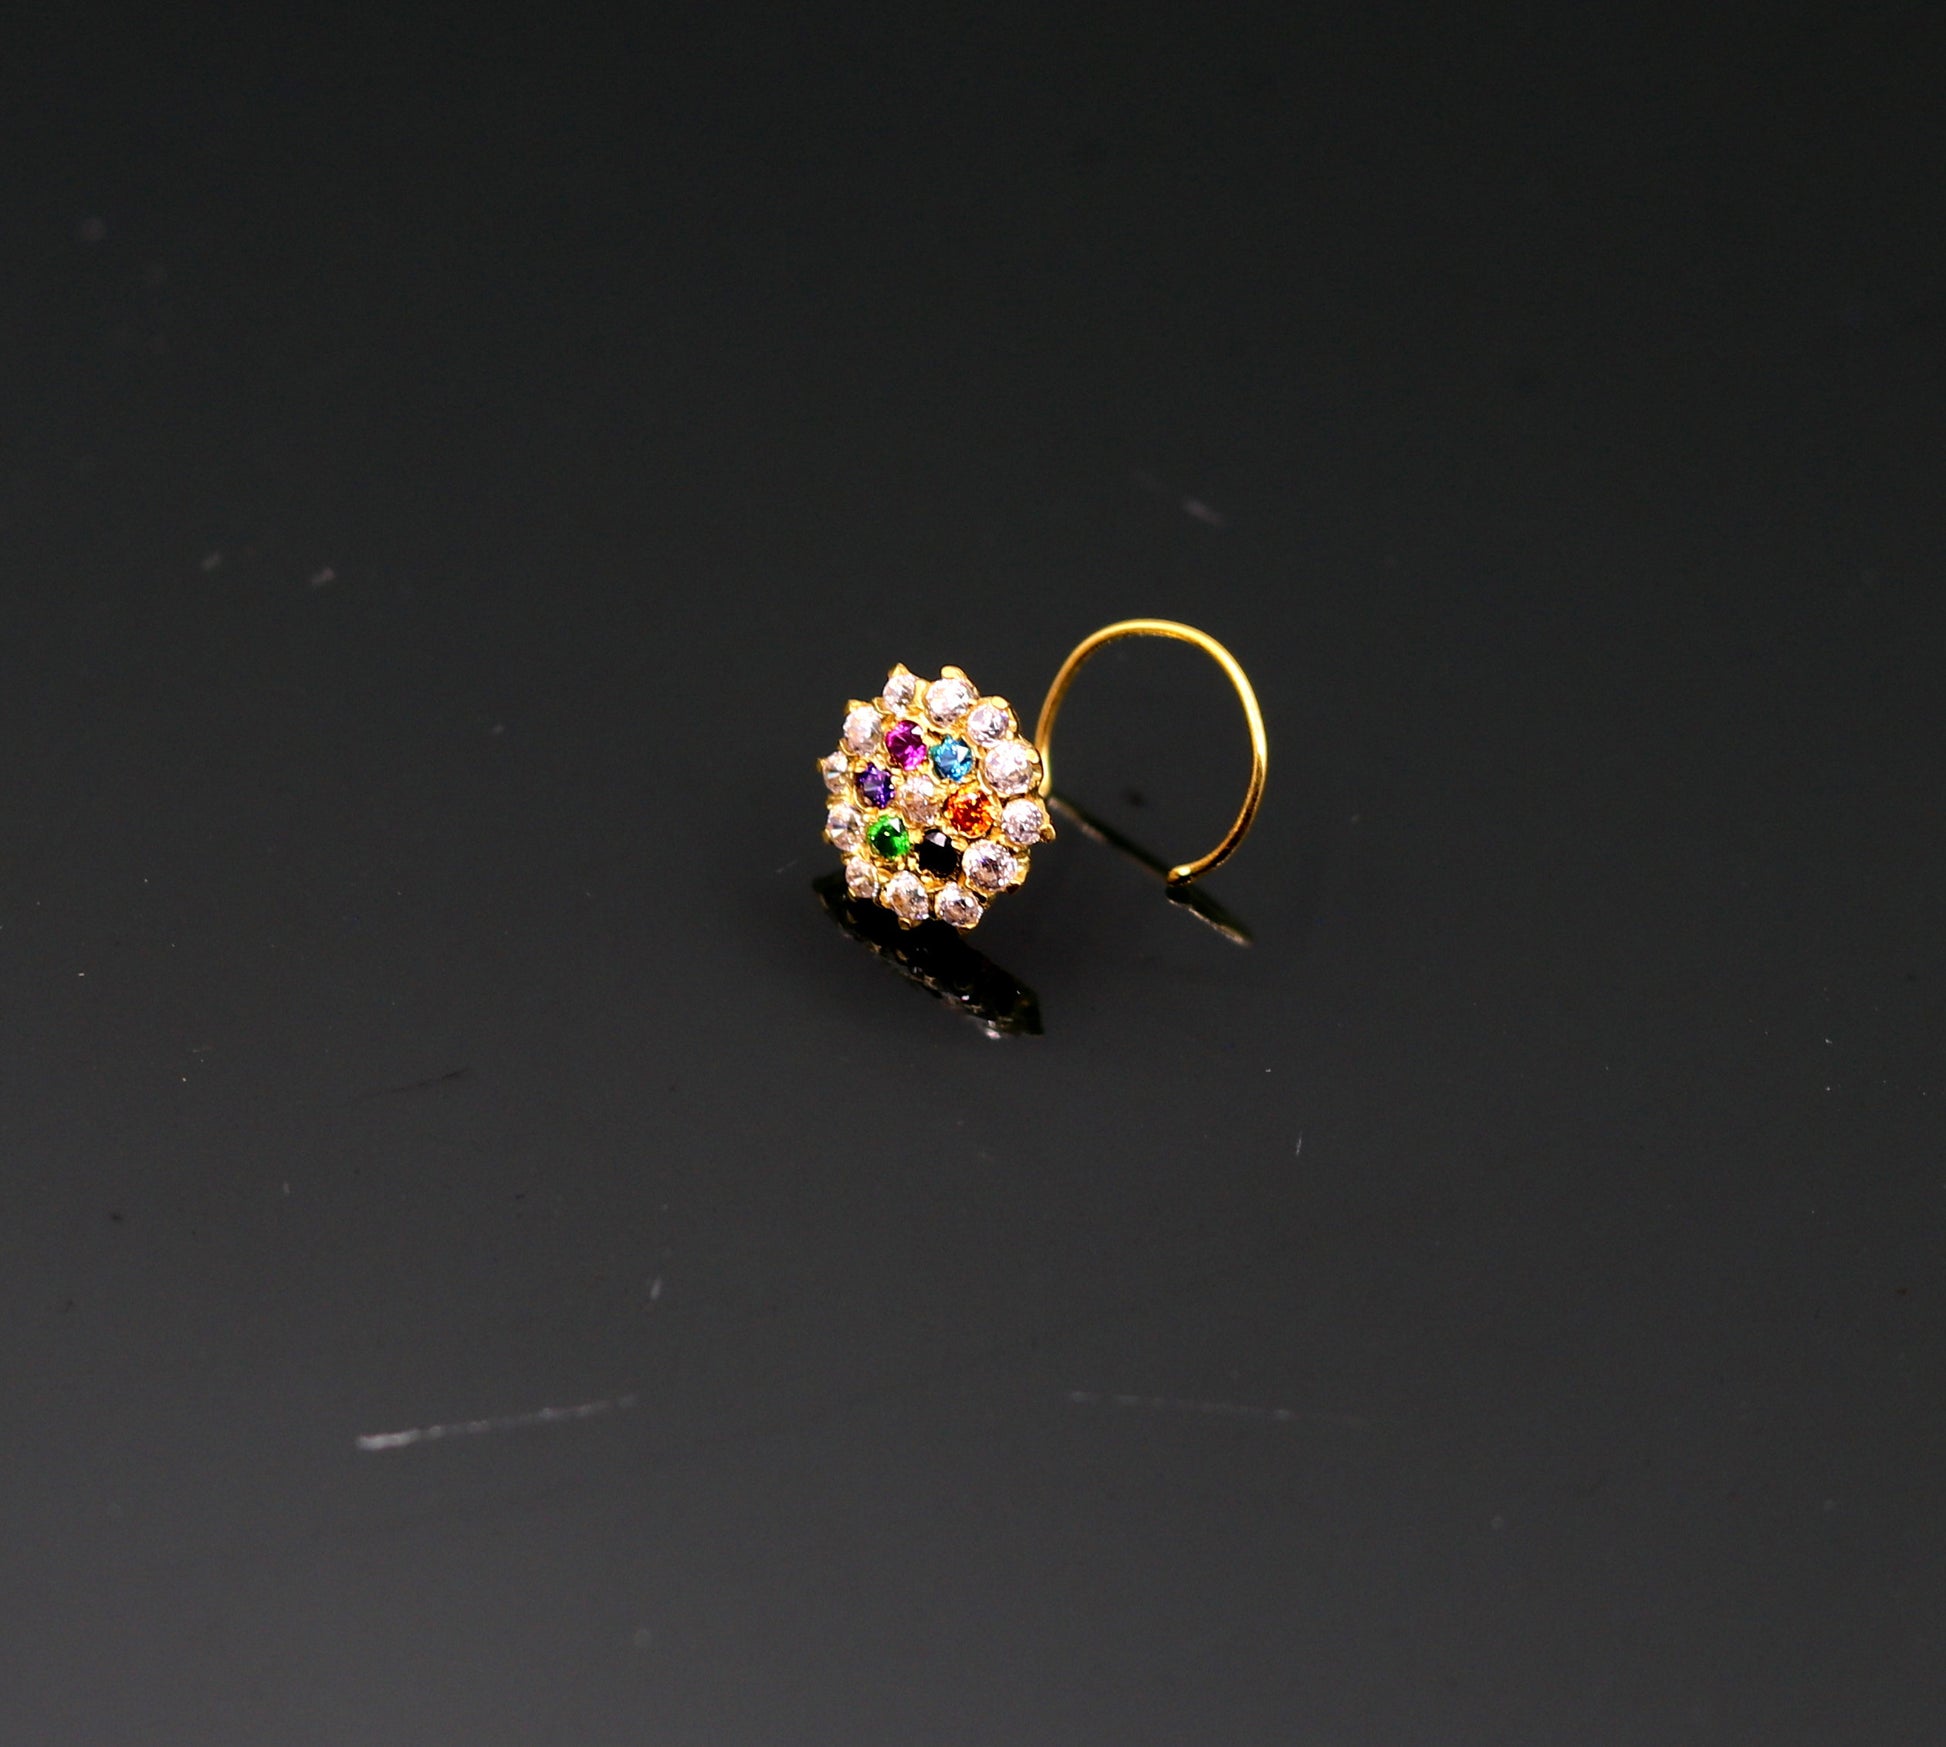 18kt yellow gold handmade fabulous multi color stone cubic zircon nose stud,excellent women girls daily use jewelry from Rajasthan gnp15 - TRIBAL ORNAMENTS